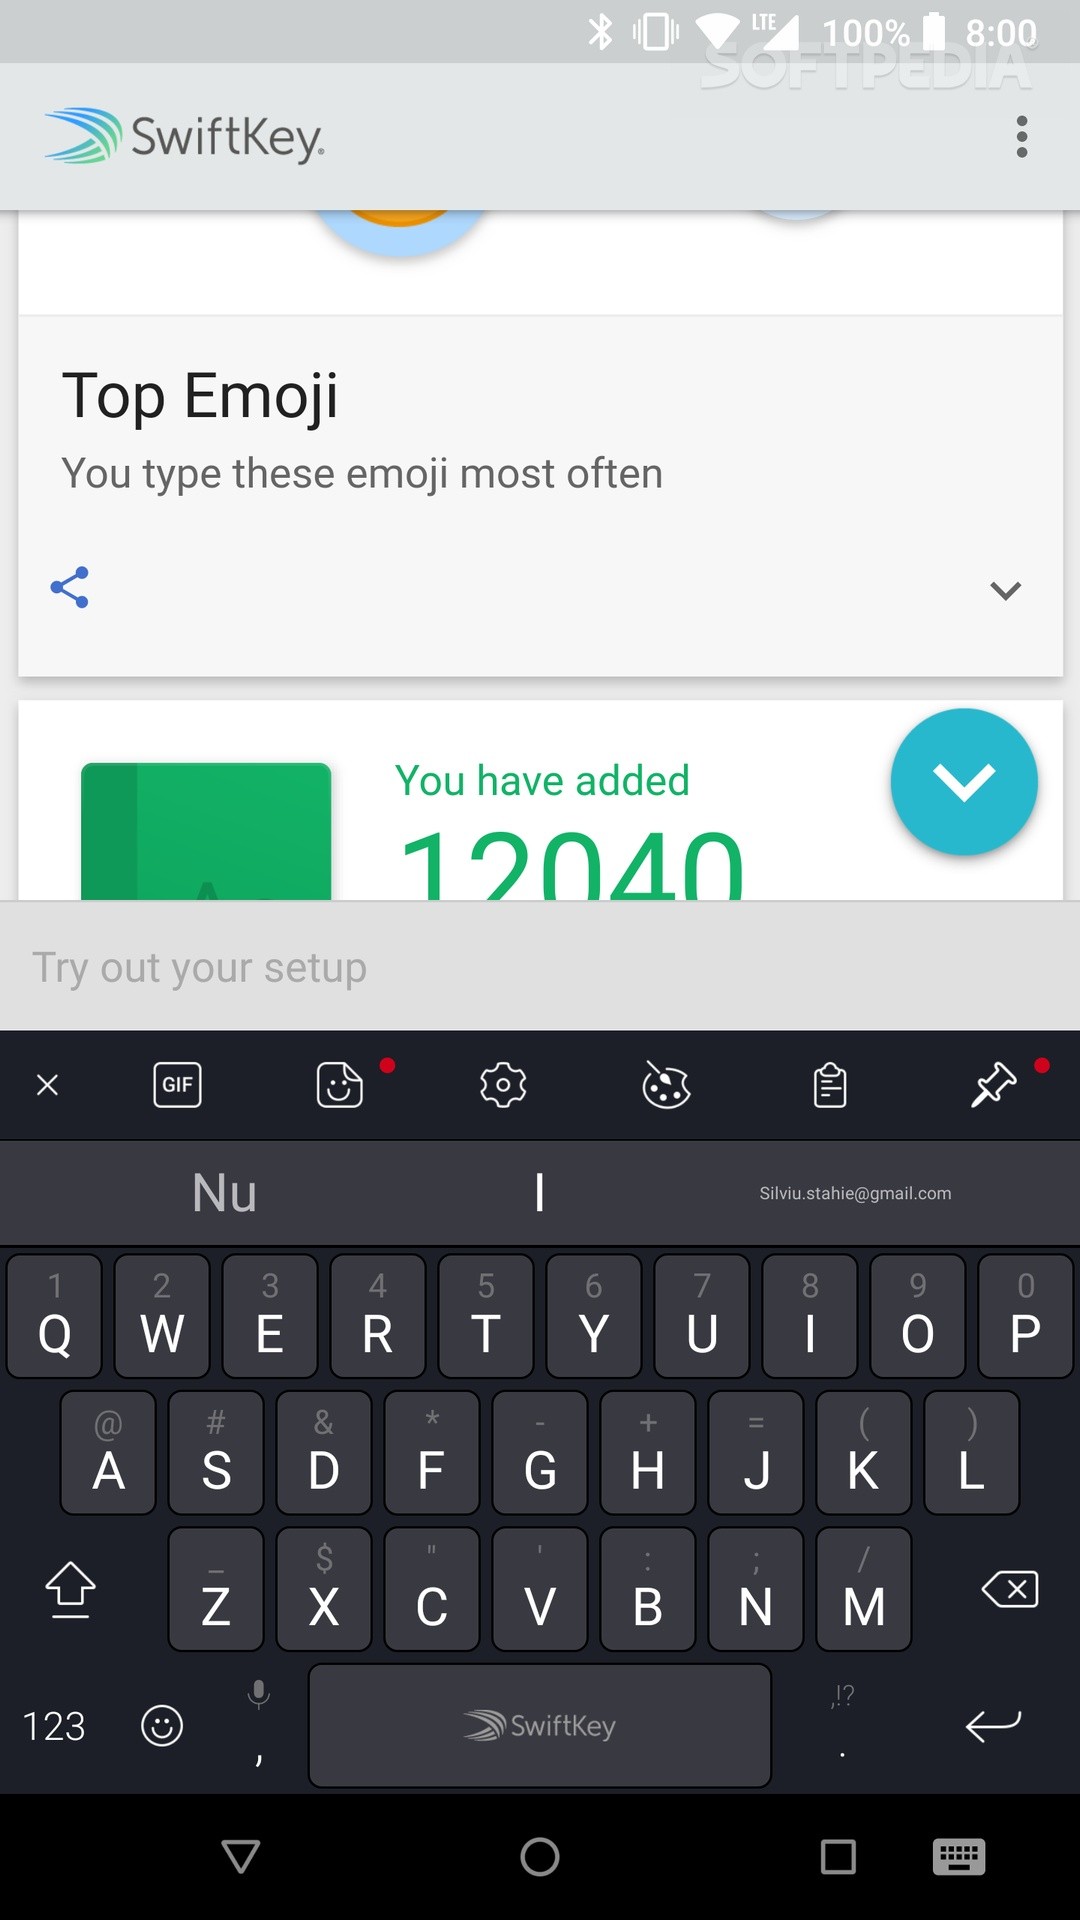 SwiftKey Keyboard 7.0 for Android Now Available for Download